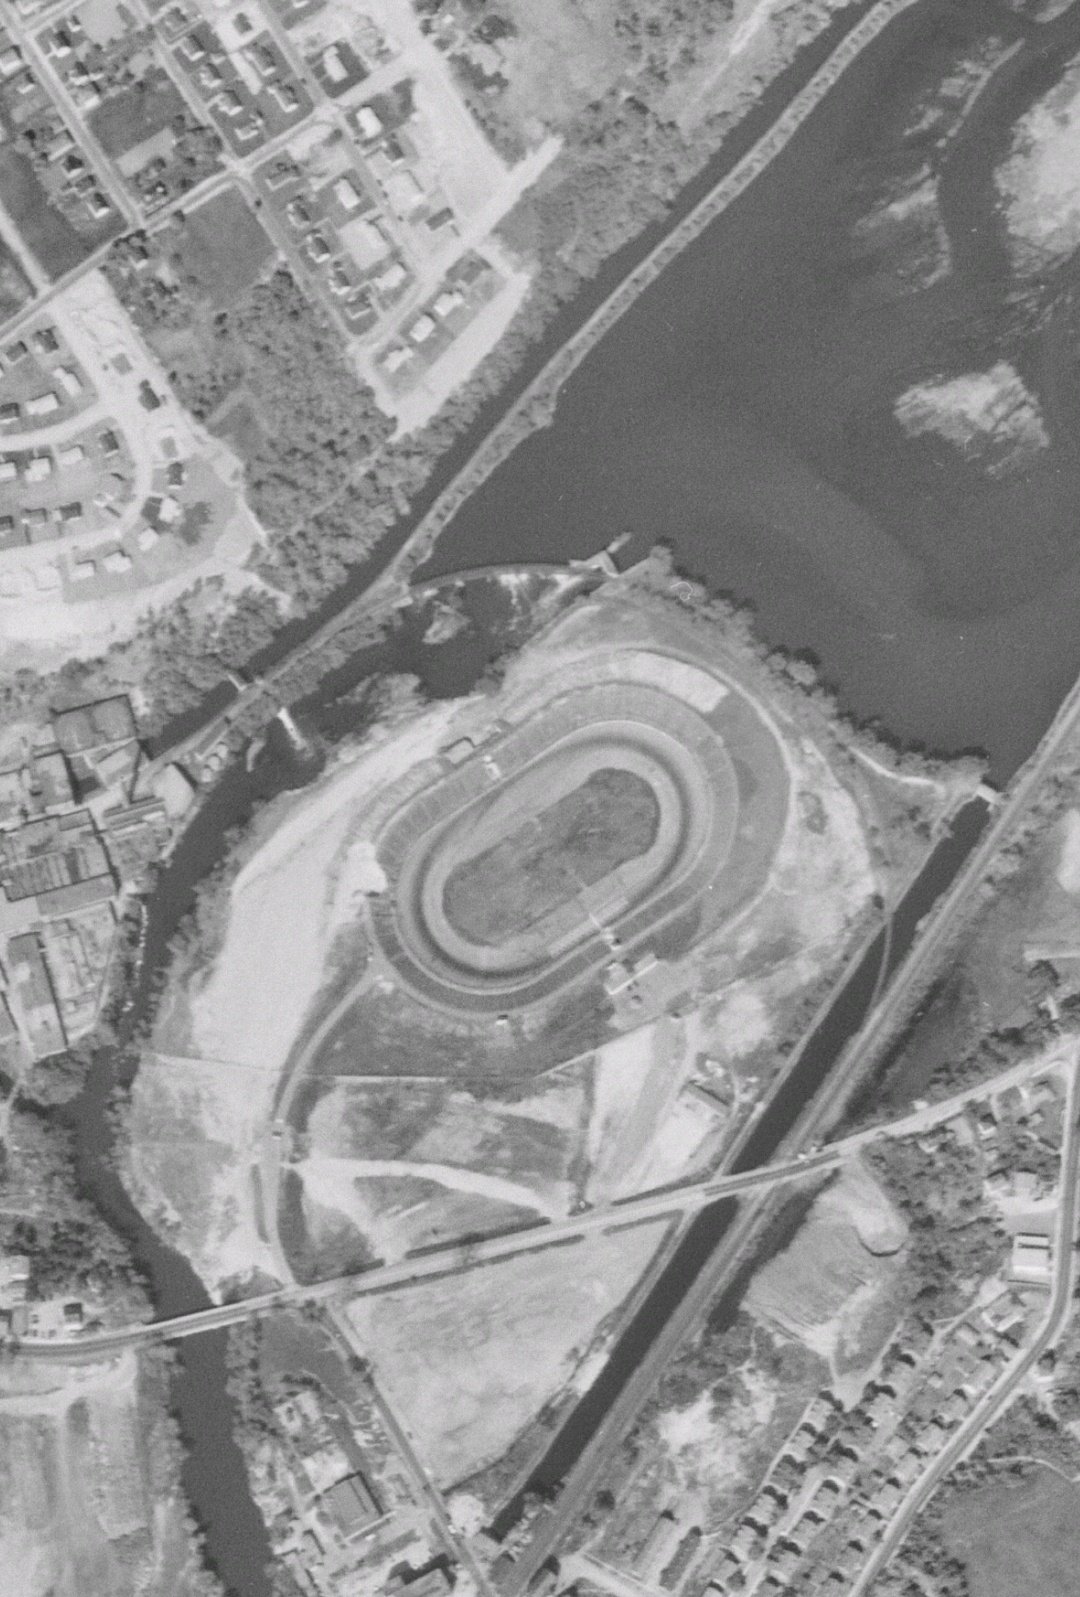 Historic Racetrack Aerials on X: Lonsdale Sports Arena (Defunct